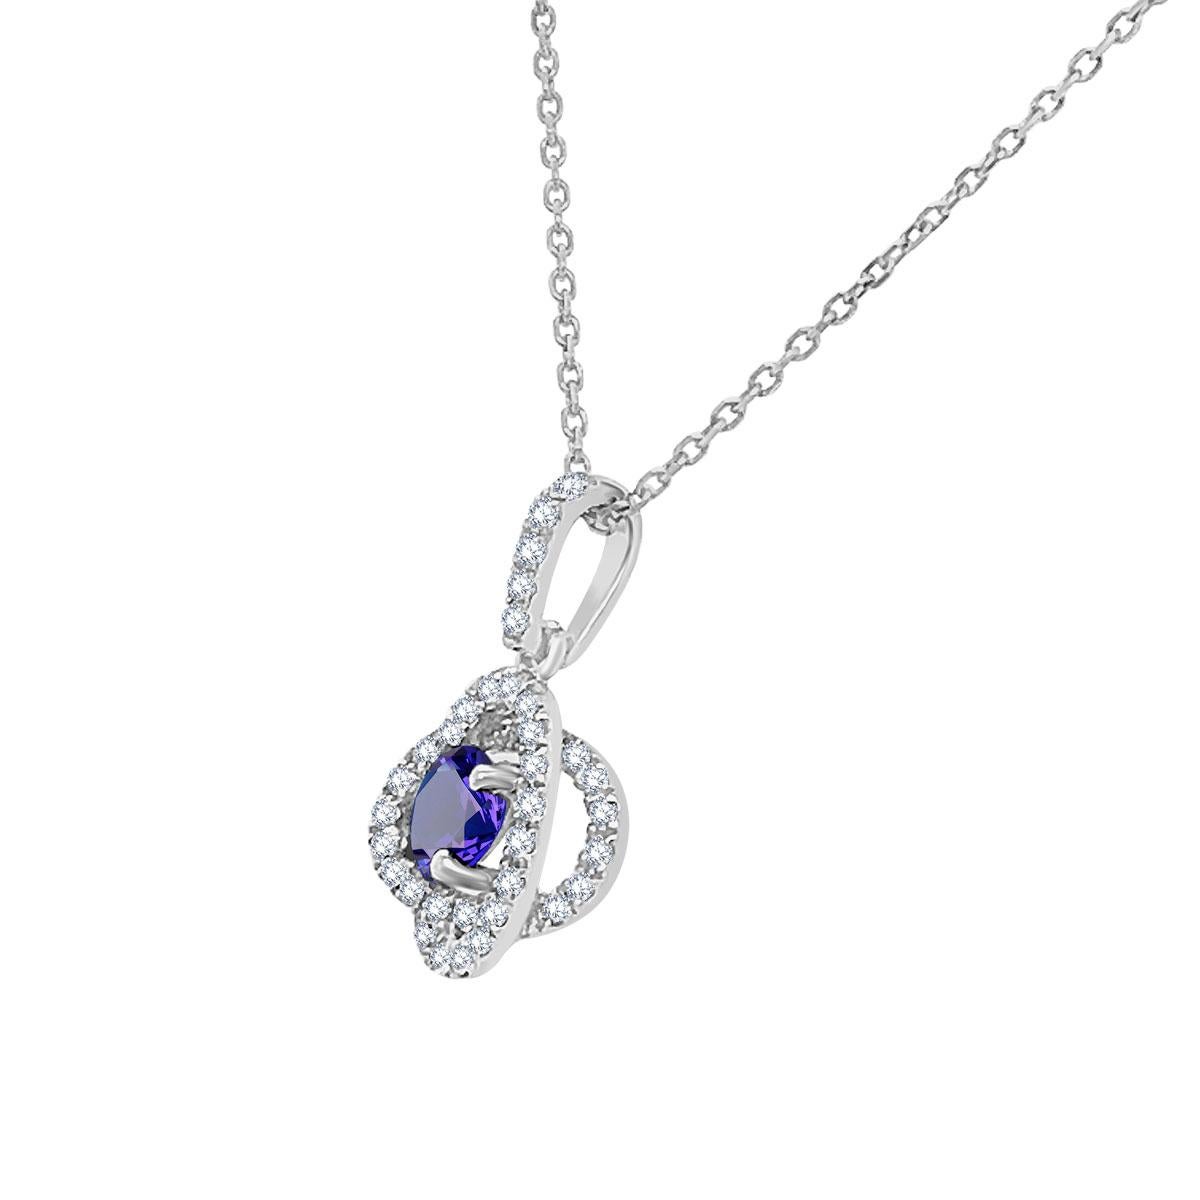 This heavenly 18k white gold Halo designed pendant features a 0.56  carat round blue Sapphire surrounded by 0.26 total carat weight of round brilliant diamonds set in two oval circles.

Product details: 

Center Gemstone Type: Blue Sapphire
Center